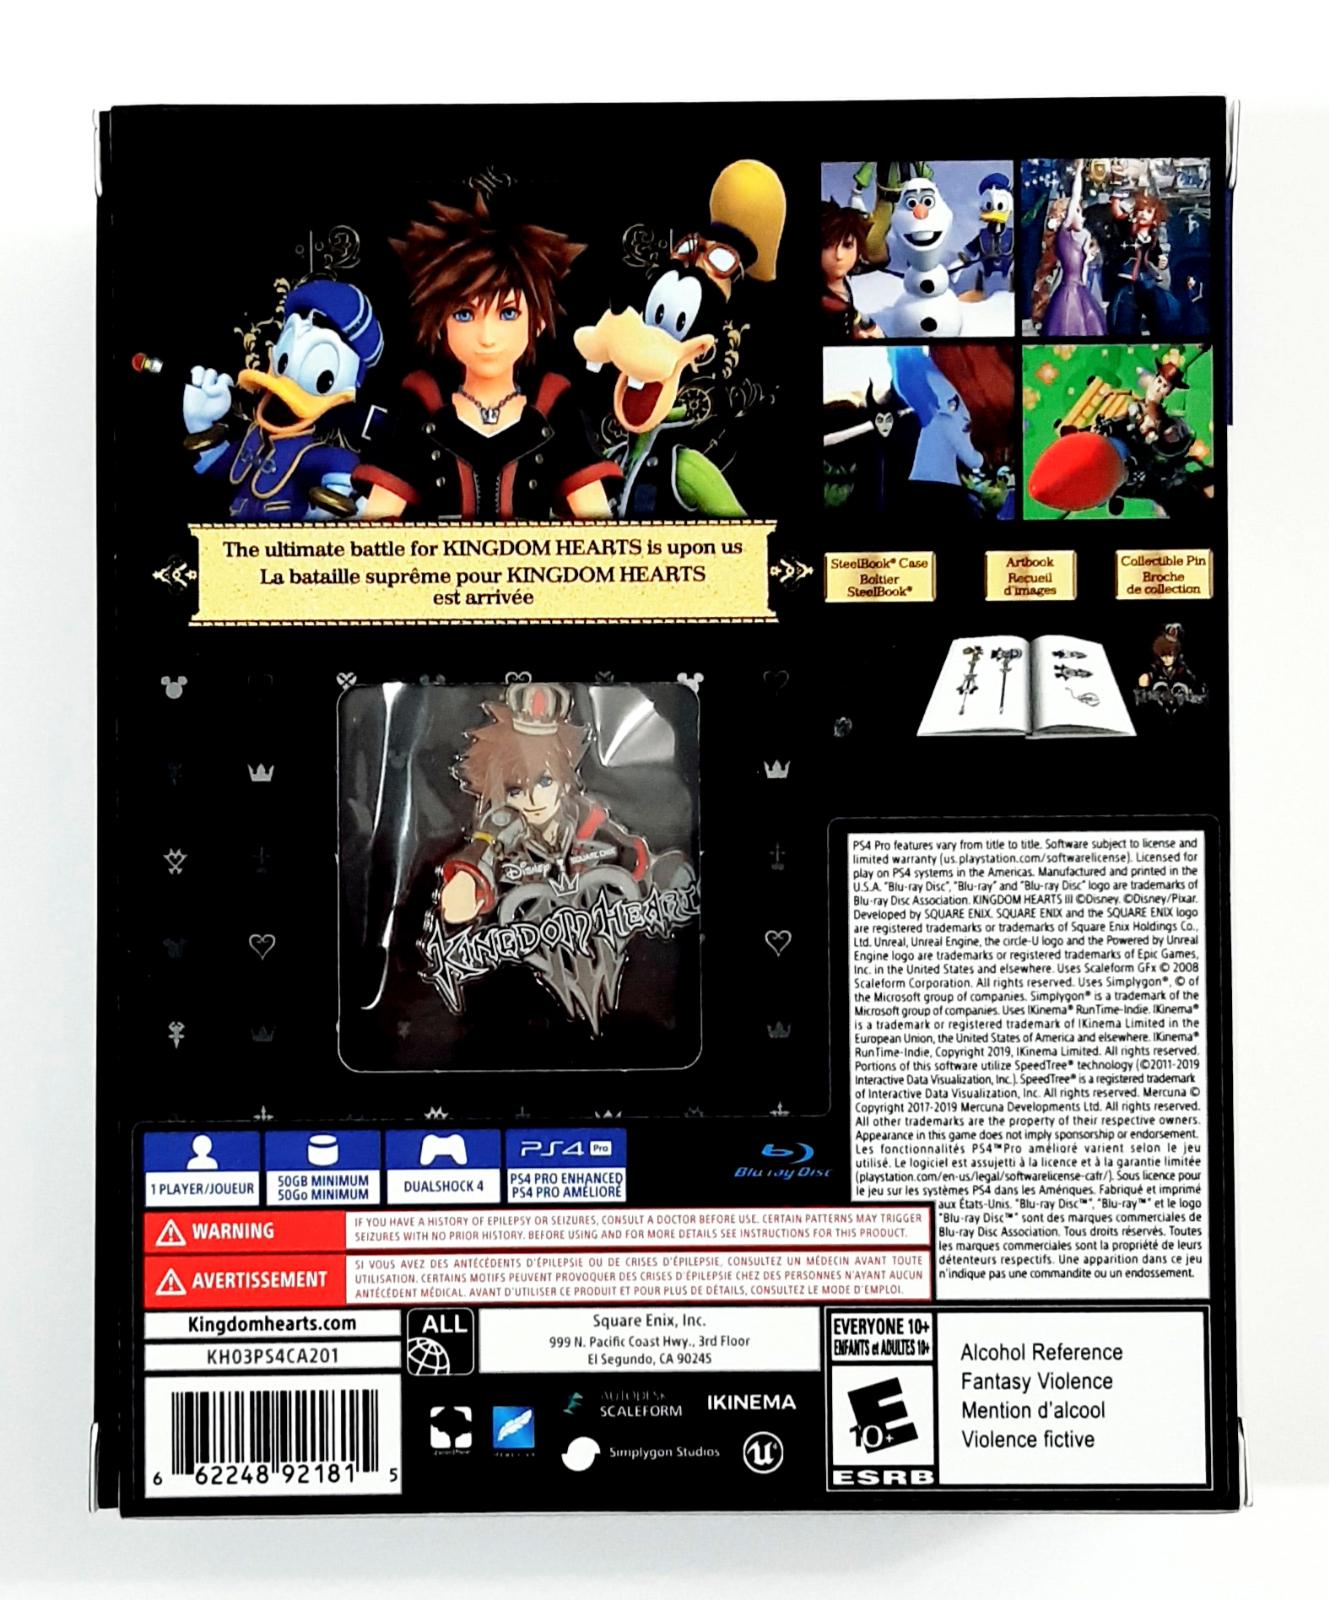 is the kingdom hearts 3 deluxe edition amazon